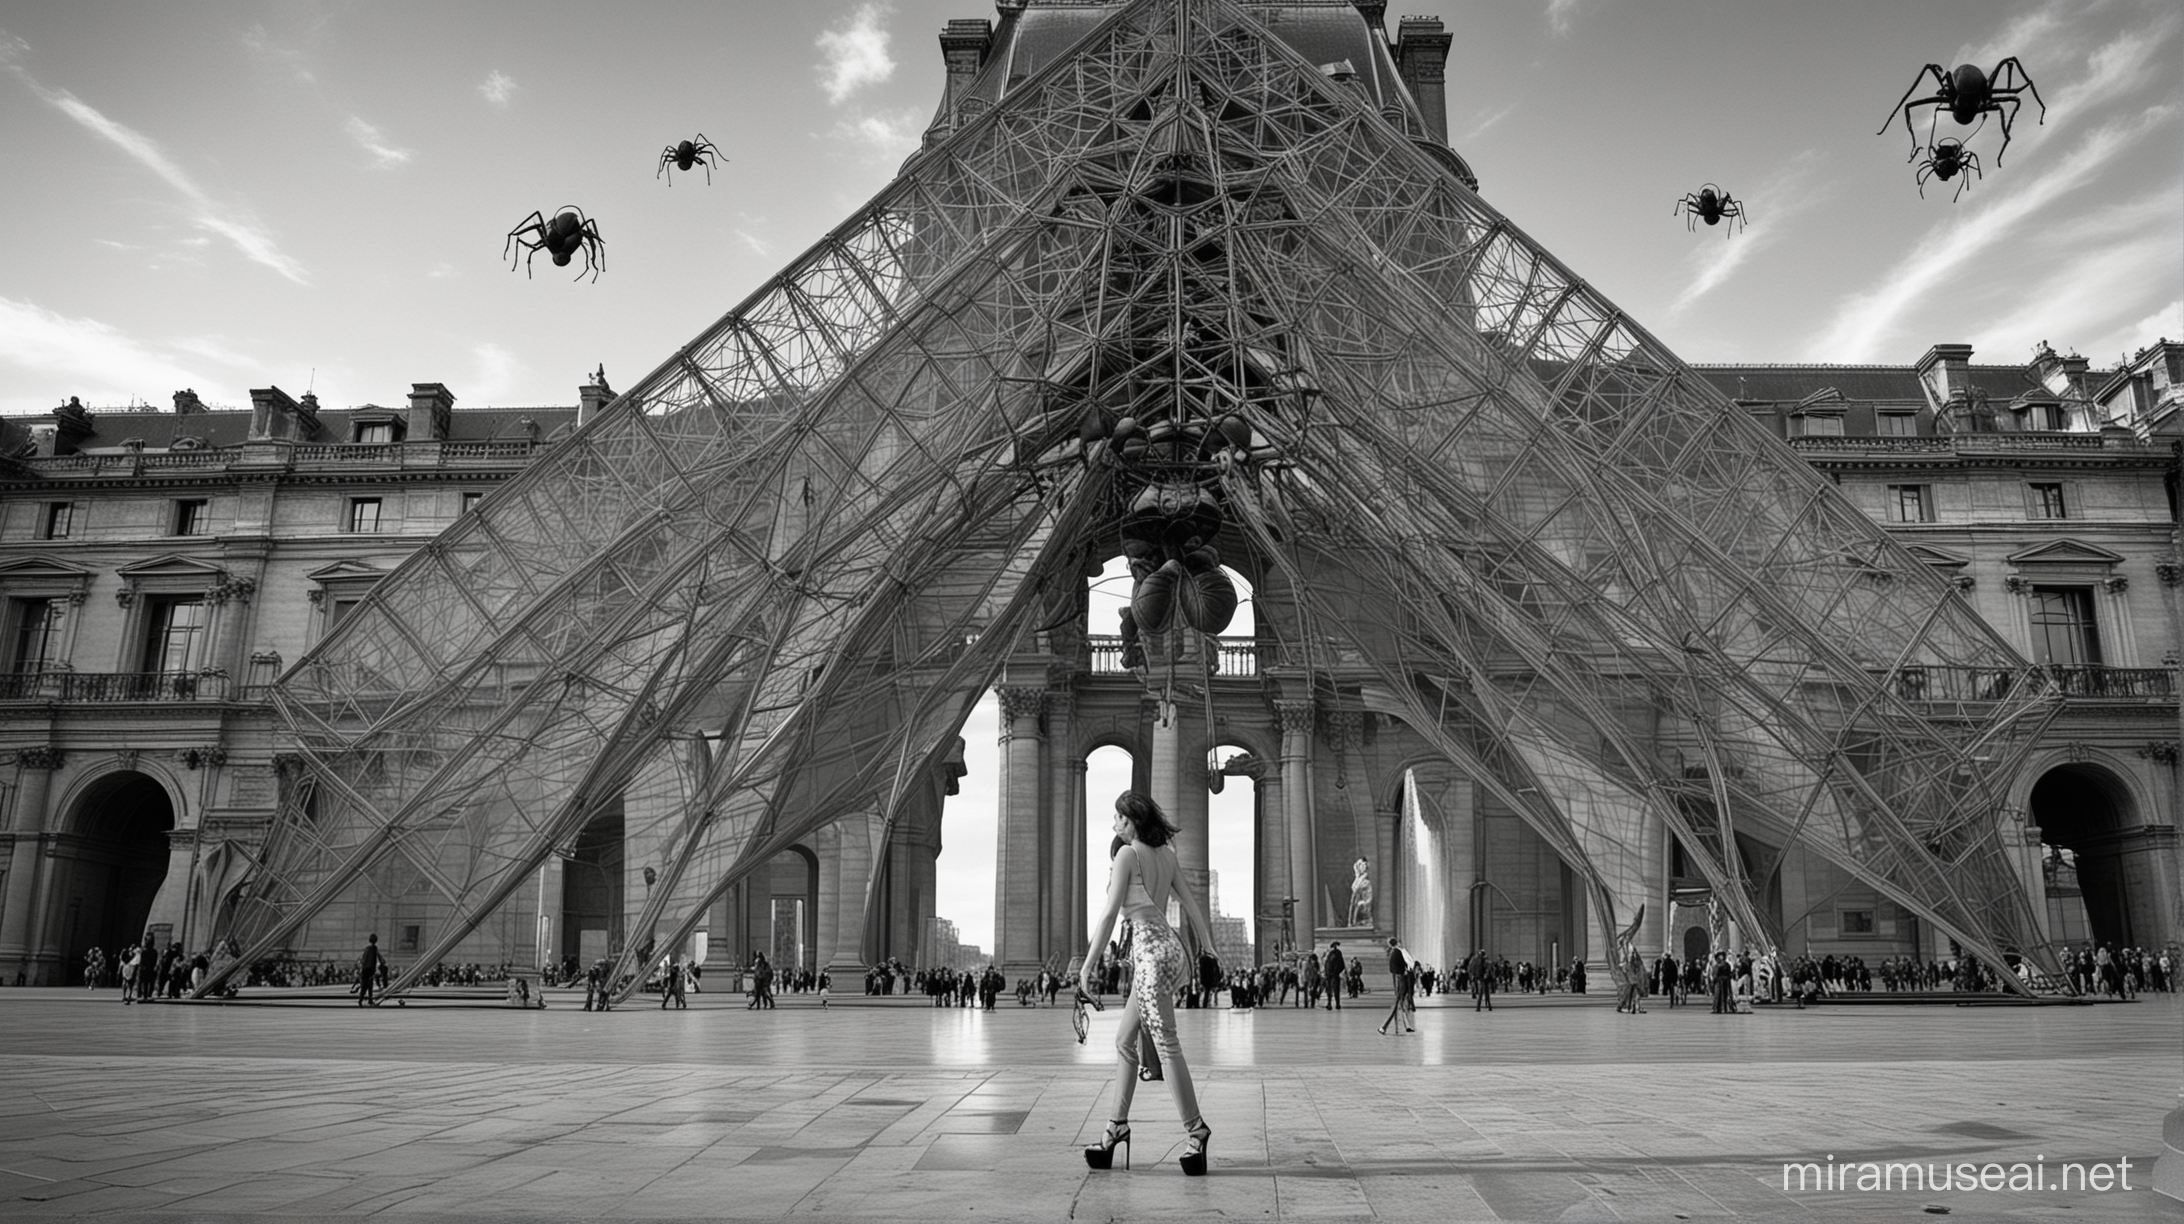 Stylish Brazilian Woman Walking Giant Spiders at the Louvre